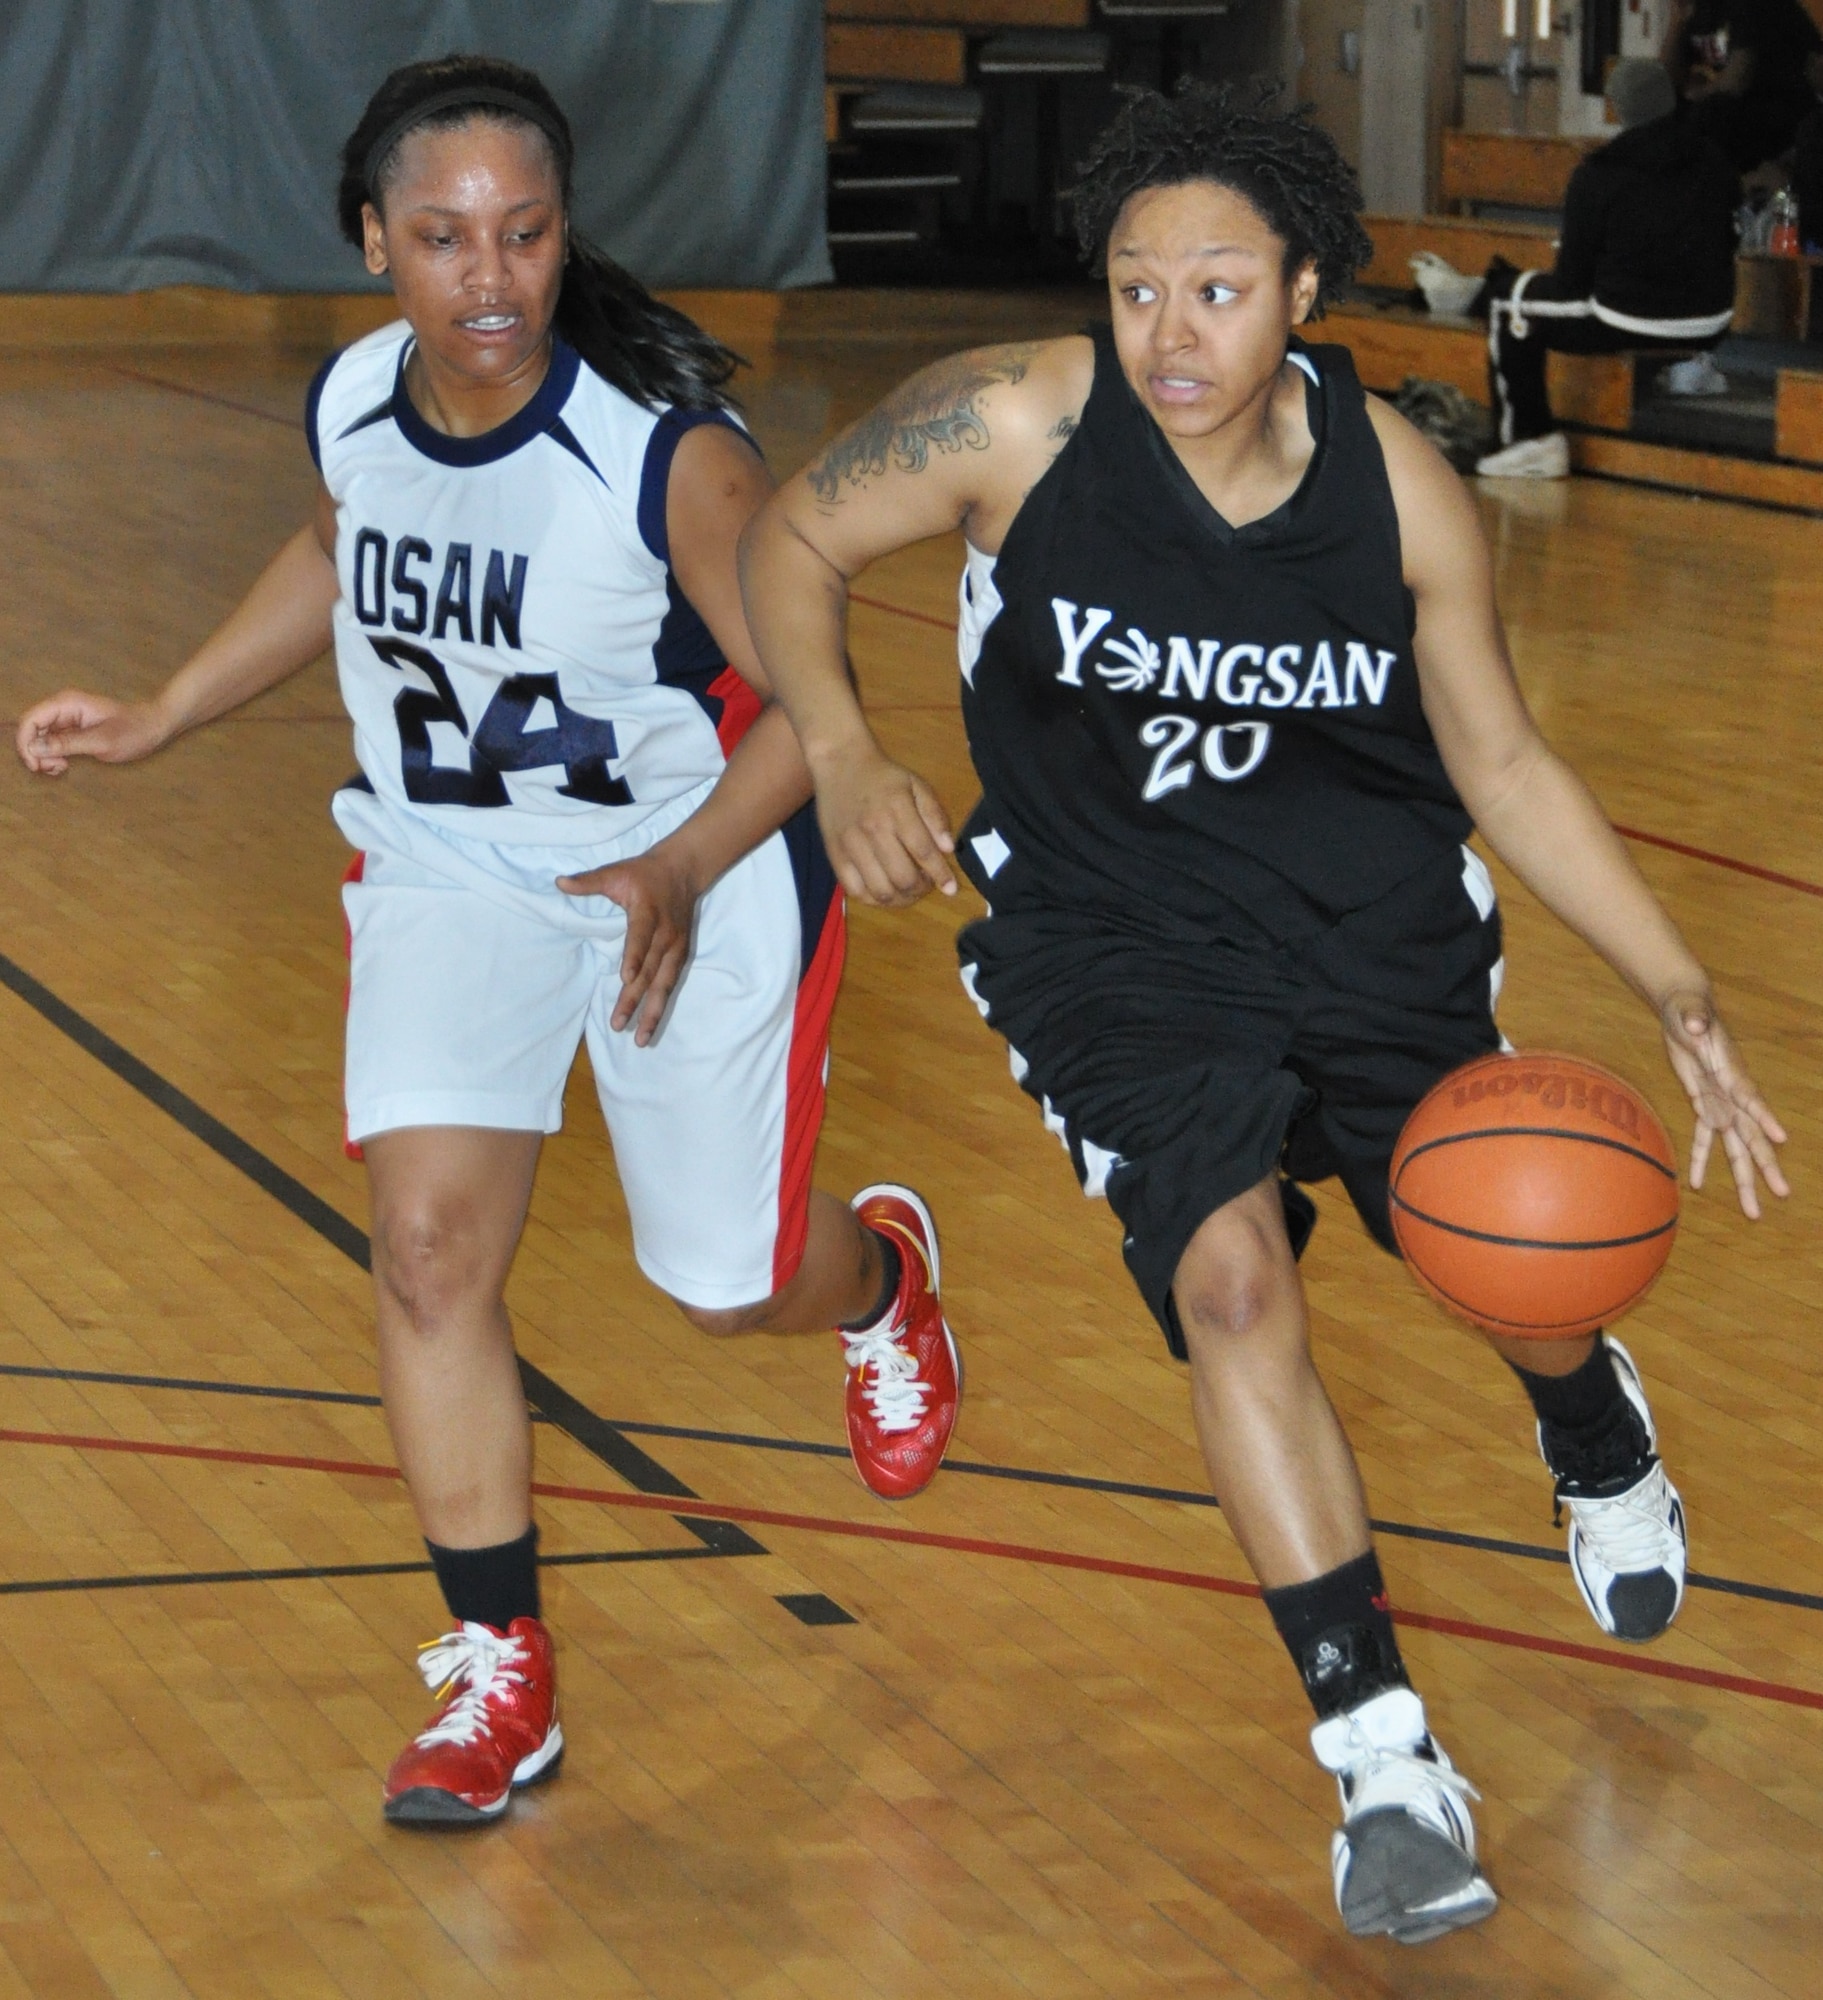 Osan's Serina Foy trails Yongsan's Karlisha Thompson during the first half of their Feb. 12, 2012, game in the Osan Air Base Fitness Center.  Osan outlasted their opponent 69-62 in overtime. Foy is assigned to the 51st Security Forces Squadron.  (Air Force photo/Senior Master Sgt. Stuart Camp)